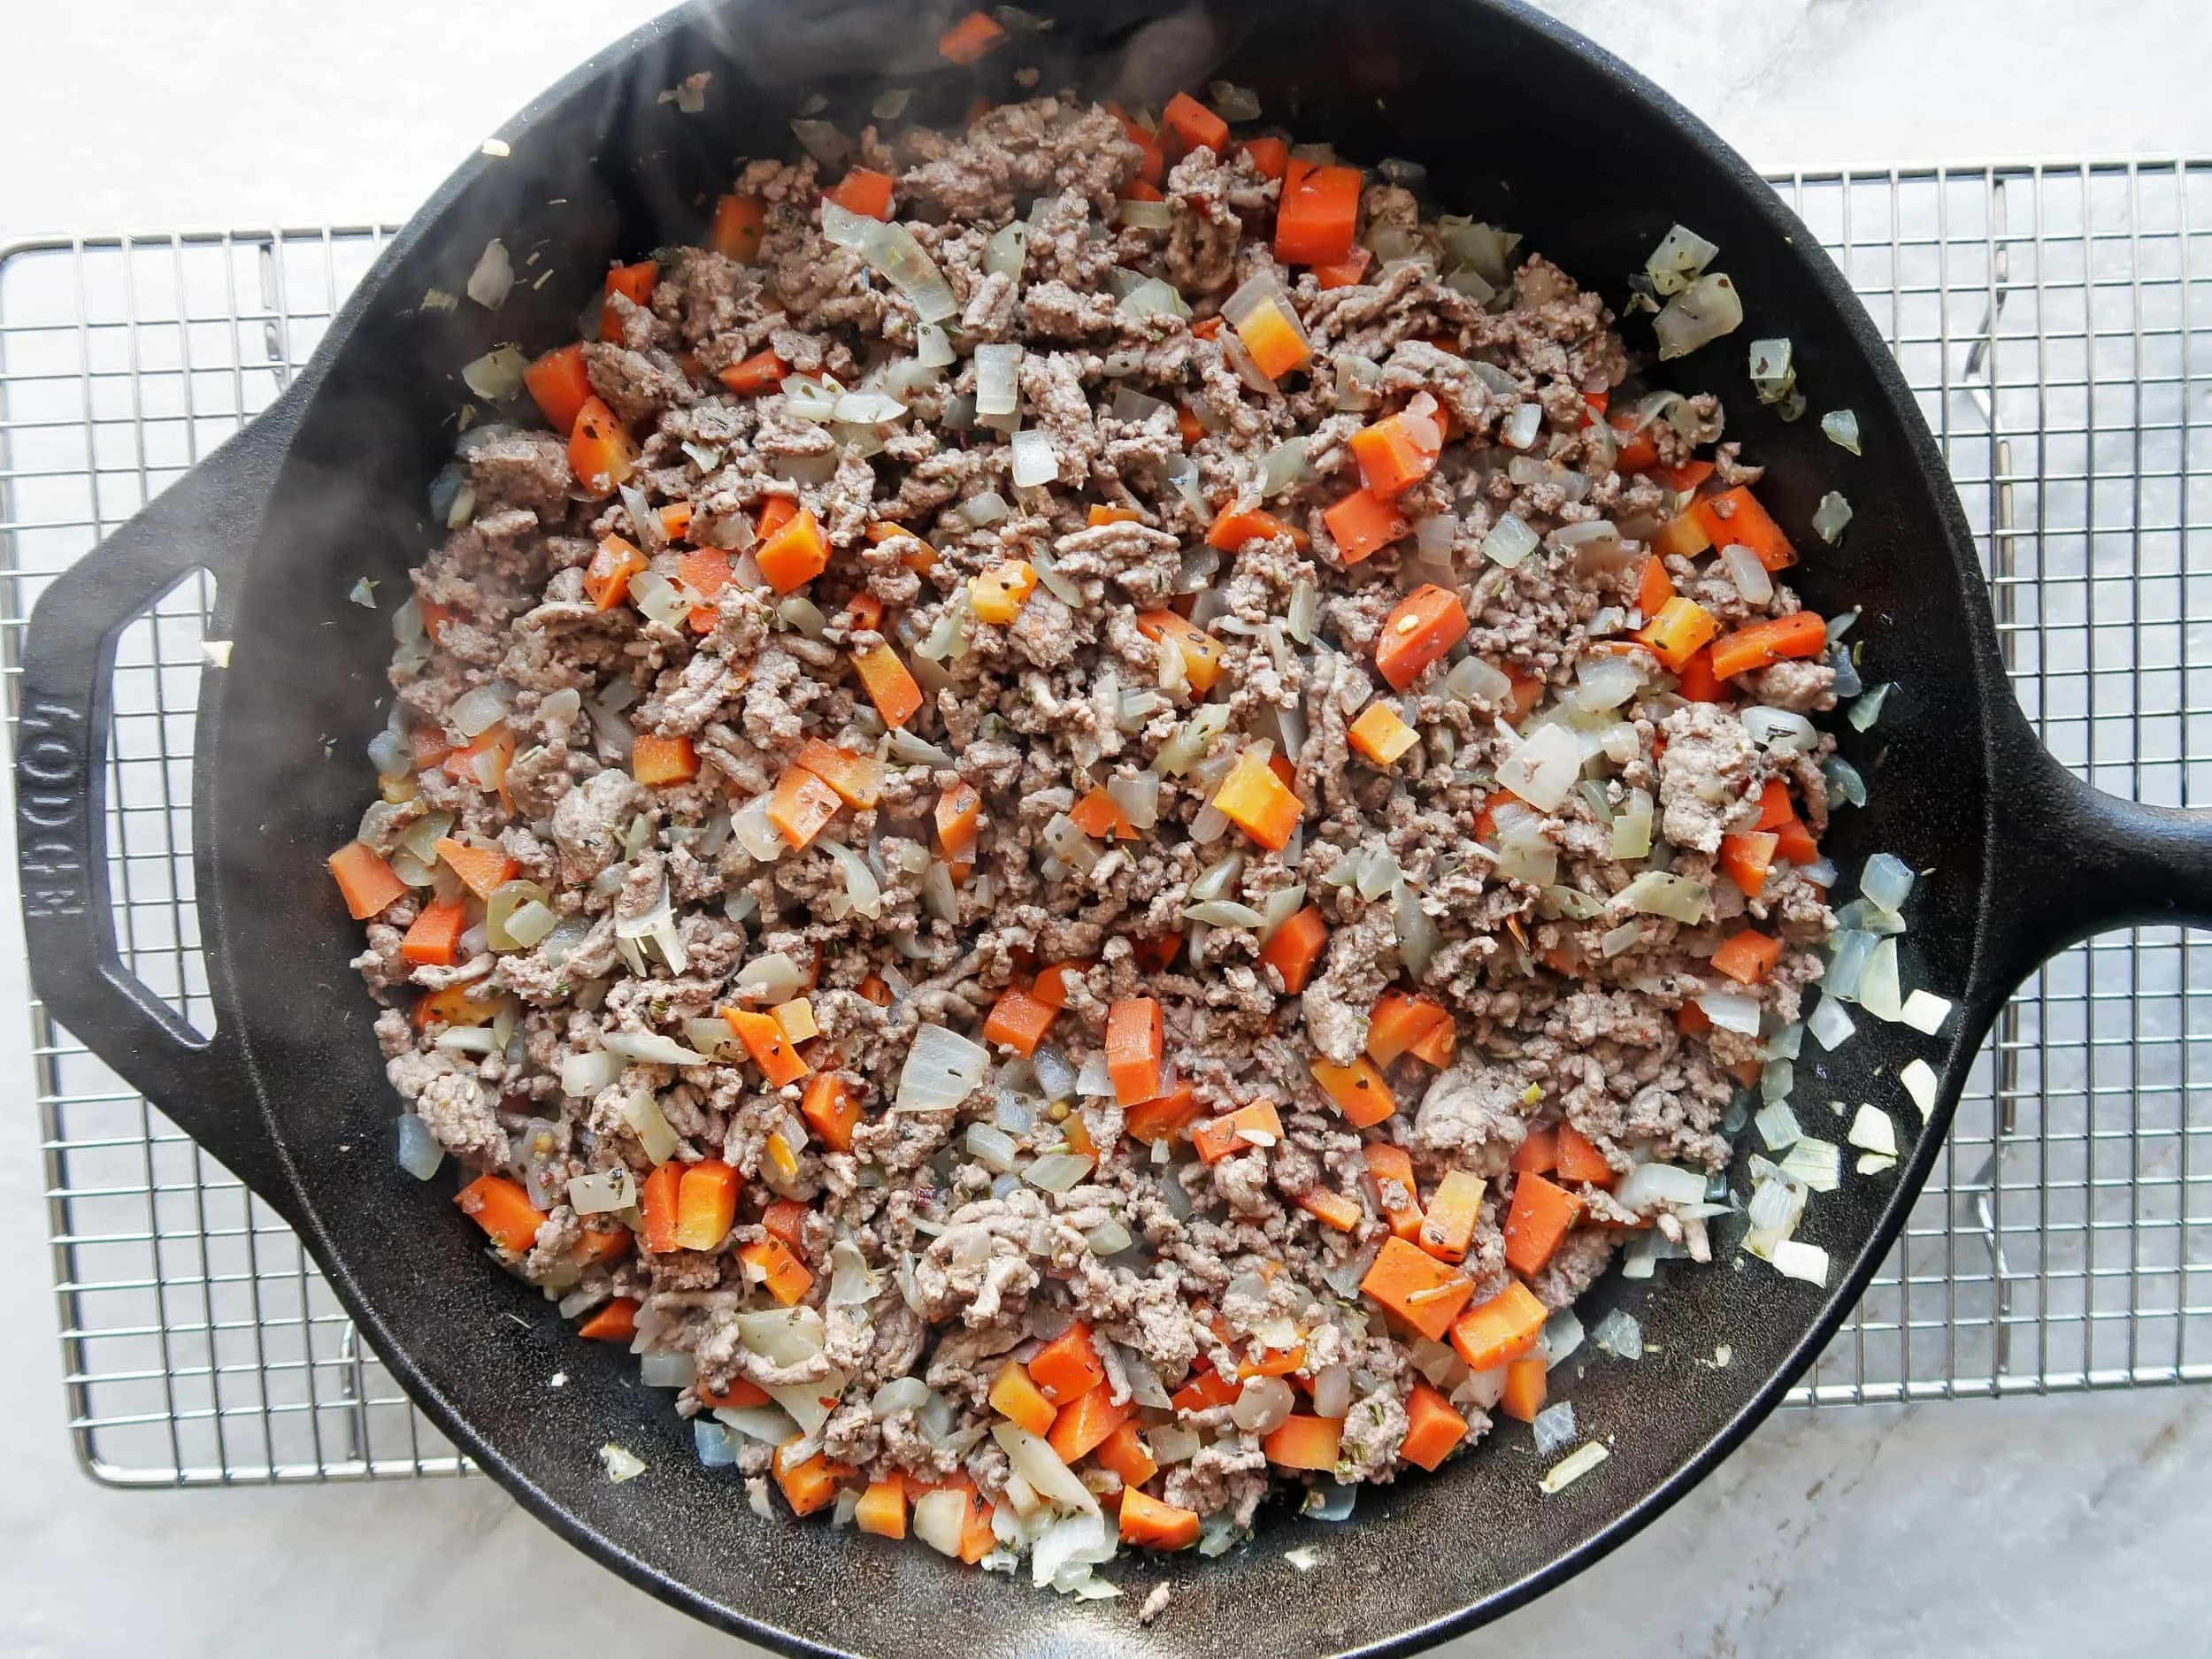 A cast iron skillet full of sauteed ground beef, chopped onions, and bell peppers.